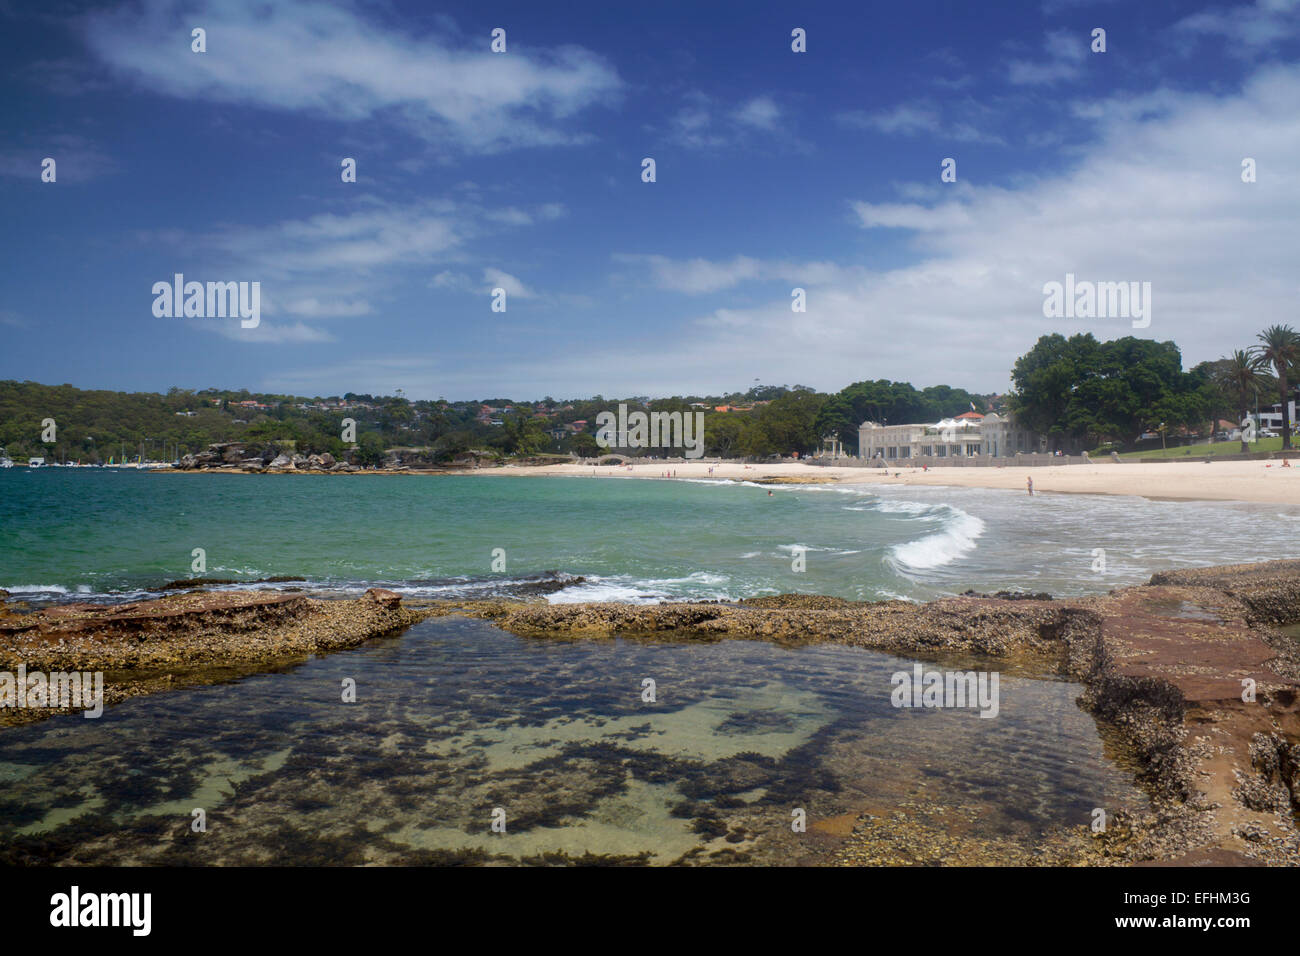 Balmoral Beach and Bathers Pavilion with rock pool in foreground Sydney Harbour Sydney New South Wales NSW Australia Stock Photo